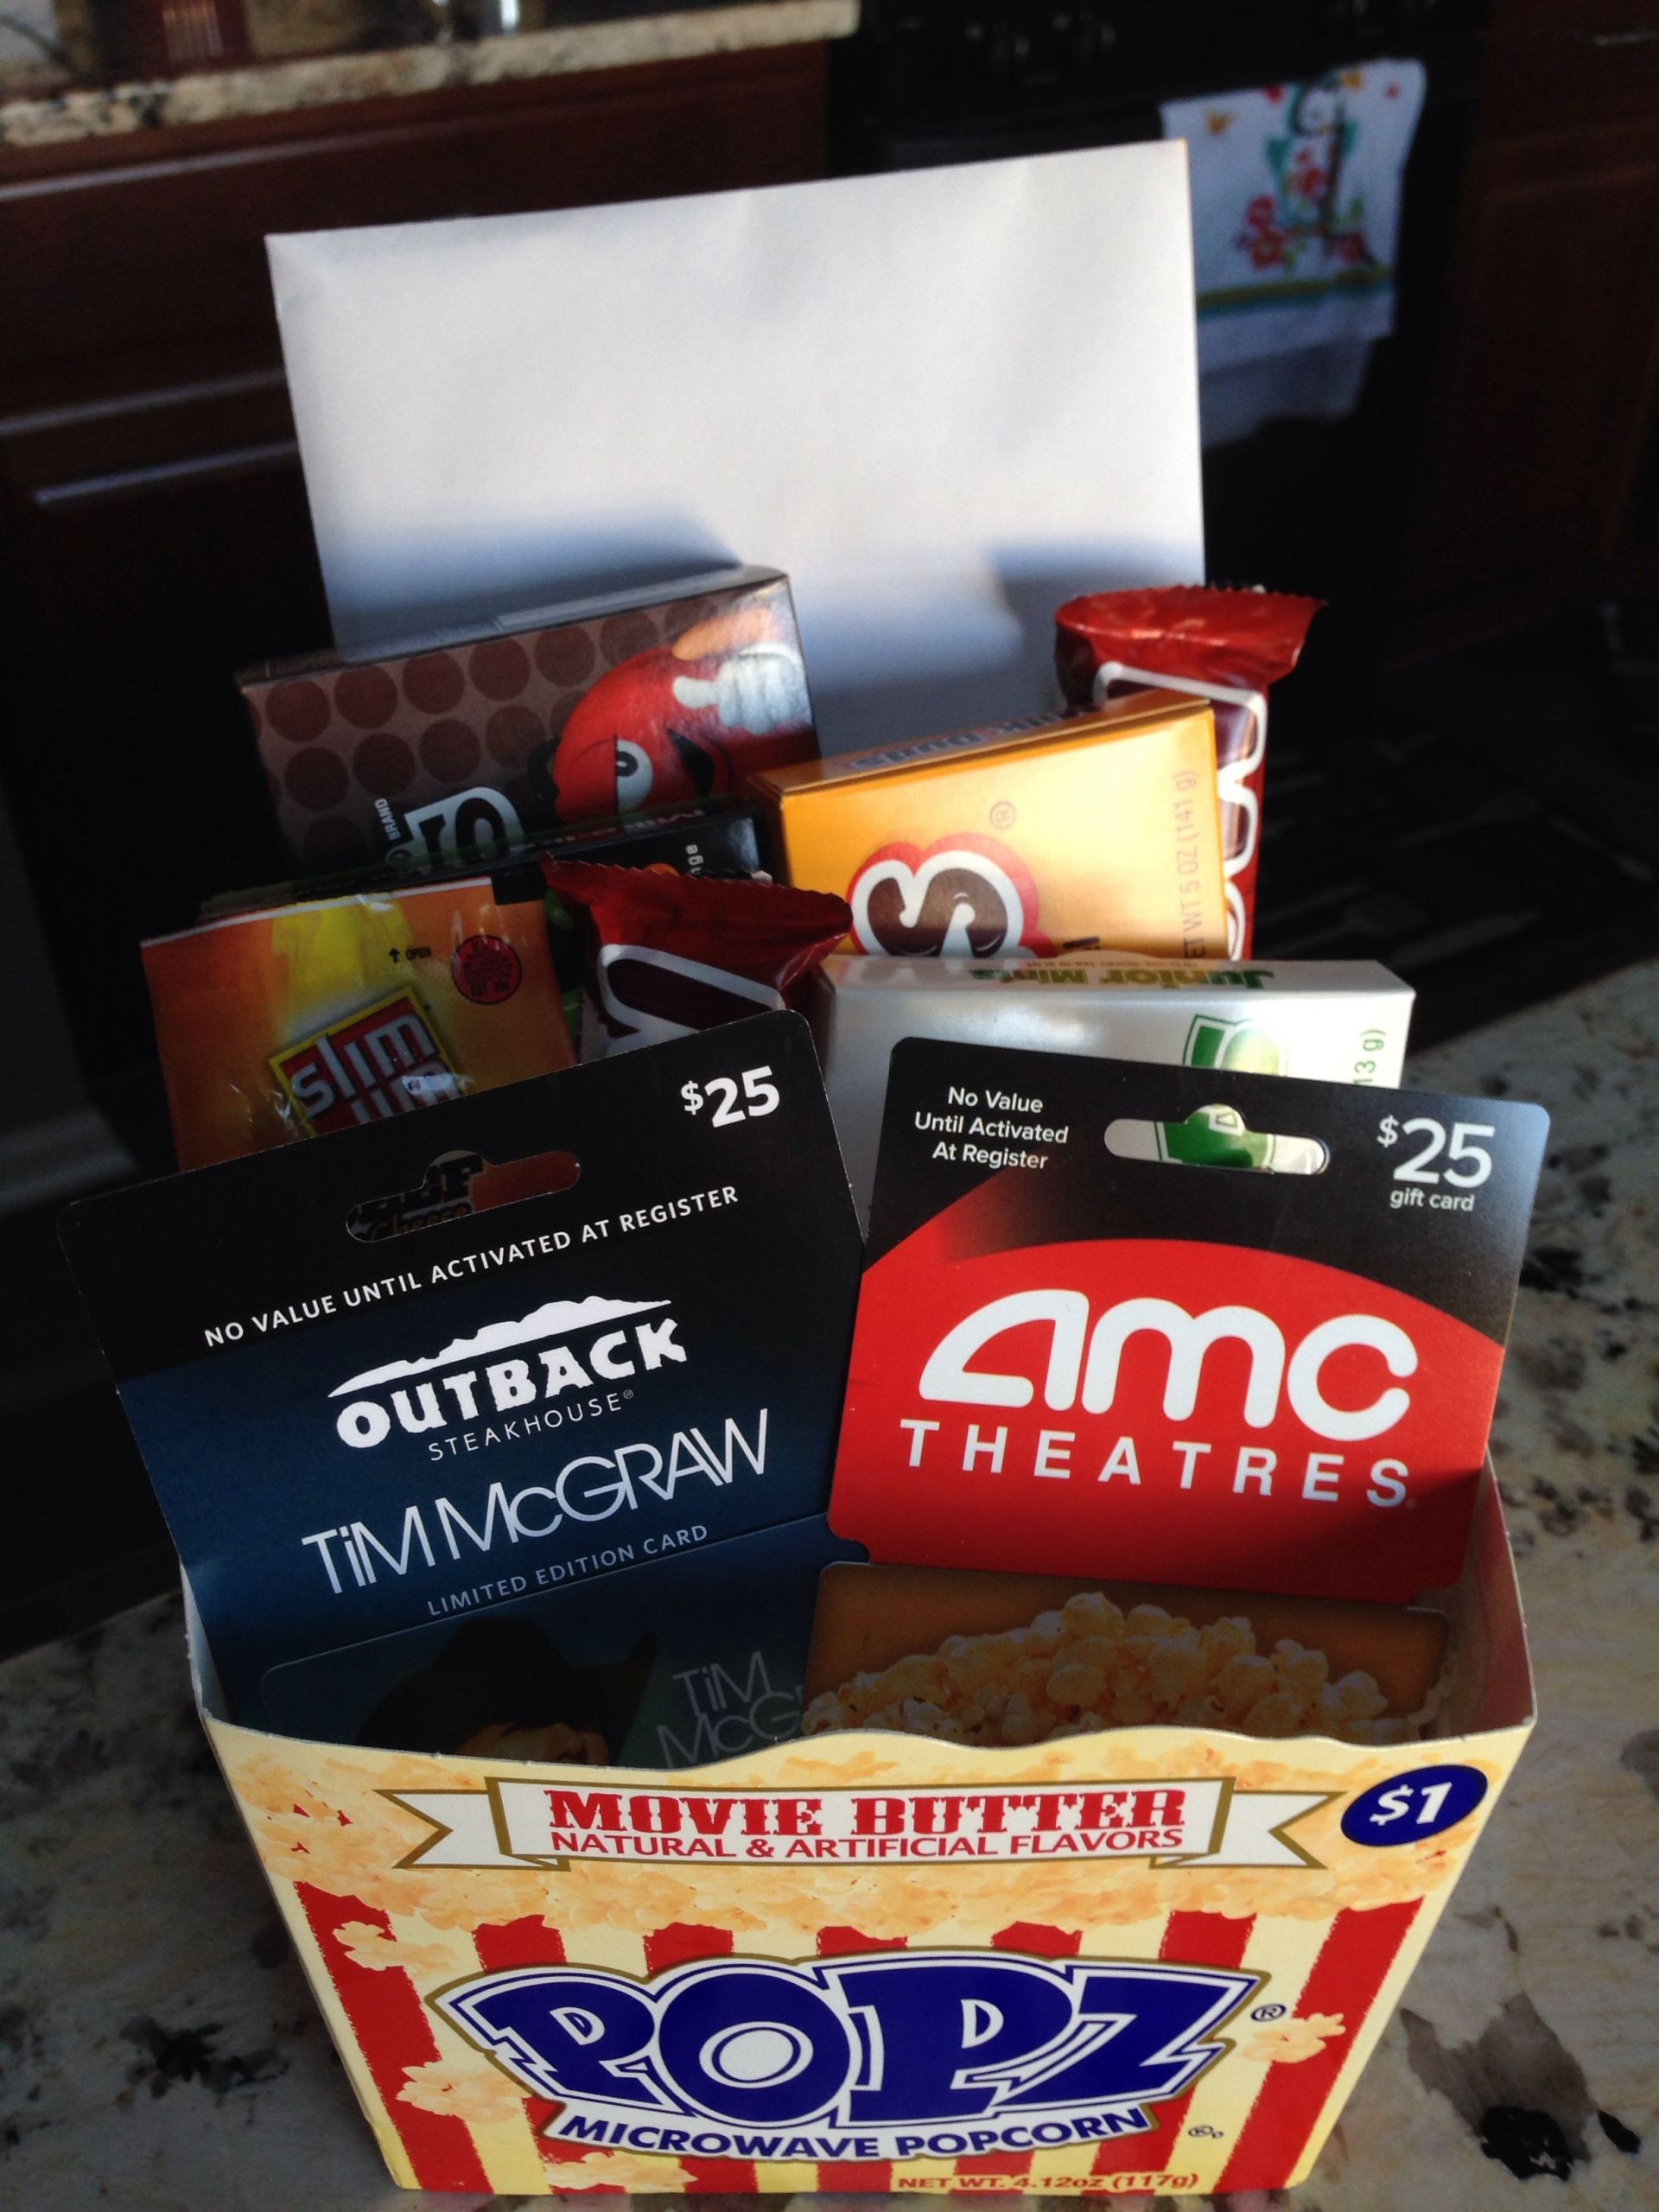 Dinner And A Movie Gift Basket Ideas
 The perfect t for your movie lover "Dinner and a Movie